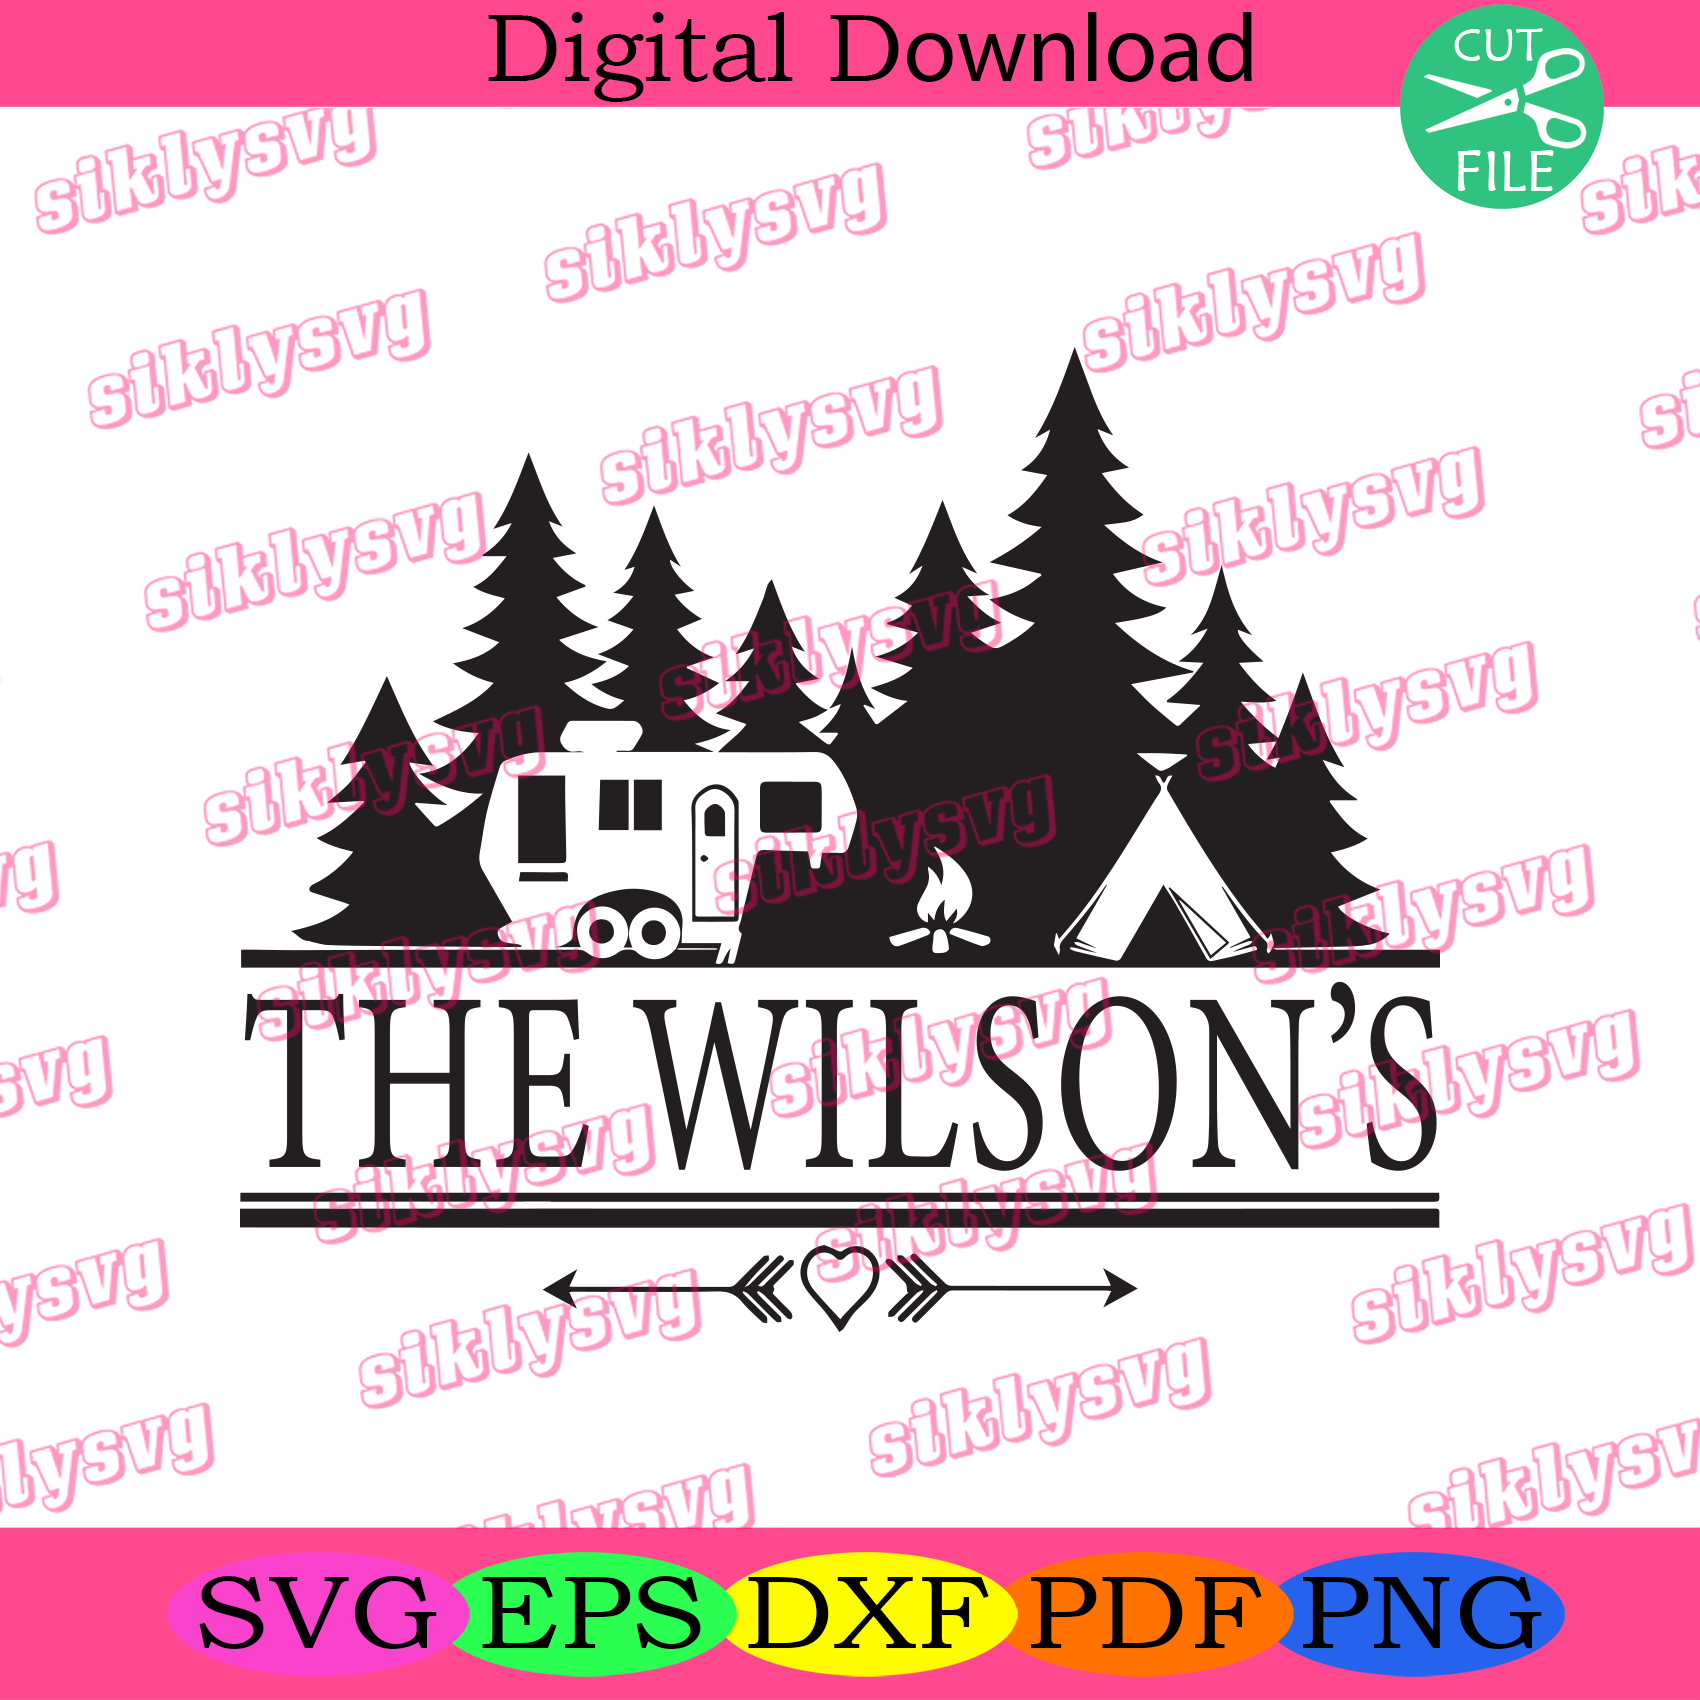 Download Trending Svg Camping Svg Happy Camping Camping Lovers Camper Svg Camping Gifts Camping Day Happy Day Camping Day Gift For Family Digital File Vinyl For Cricut Svg Cut Files Svg Clipart Silhouette